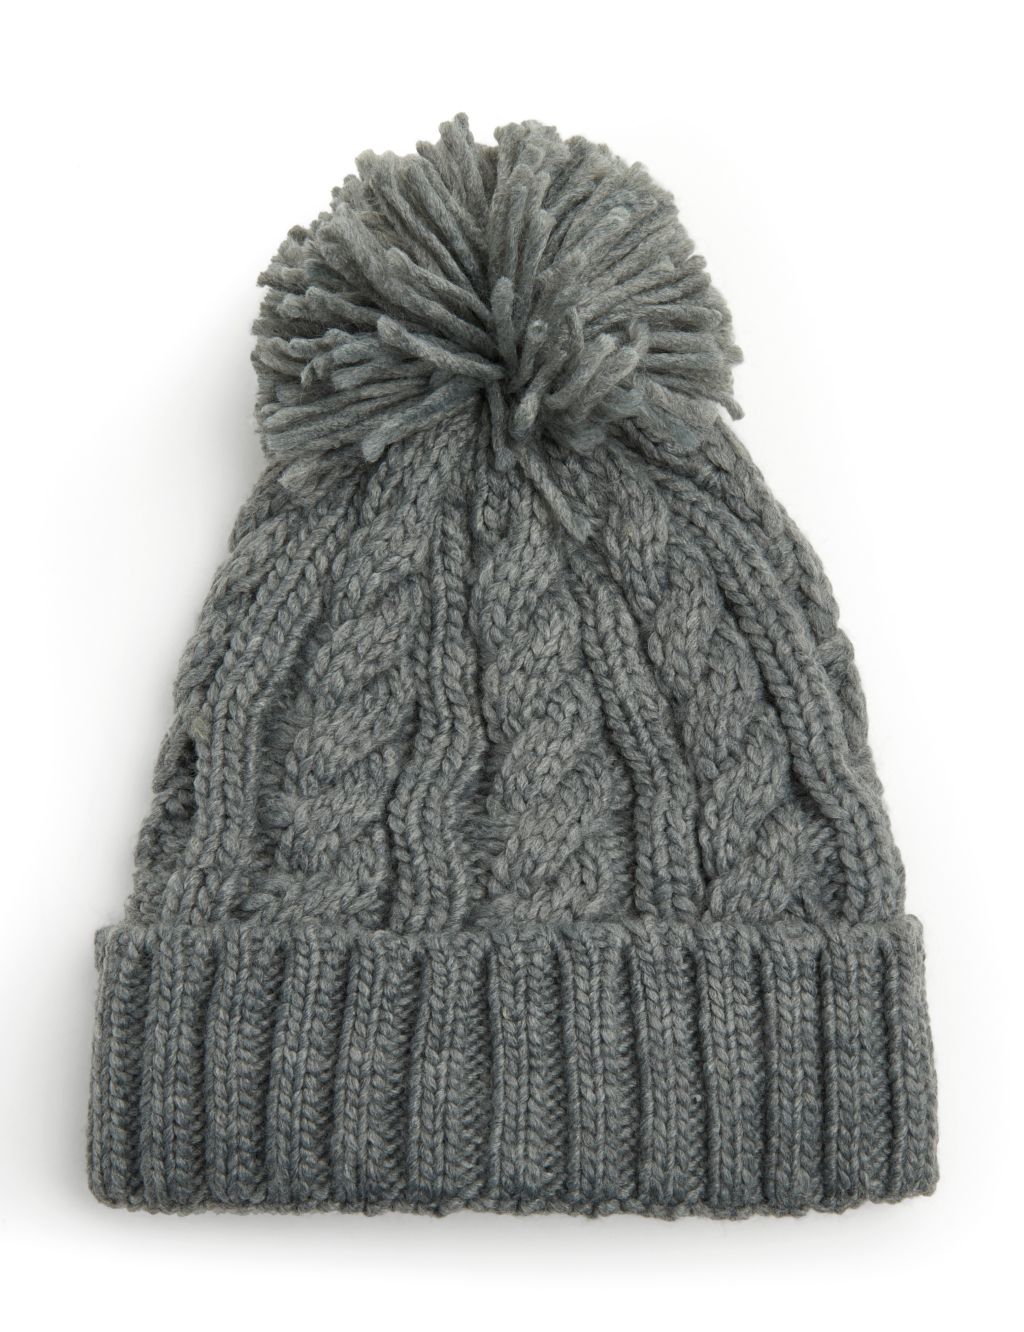 Personalised Adults Beanie image 2